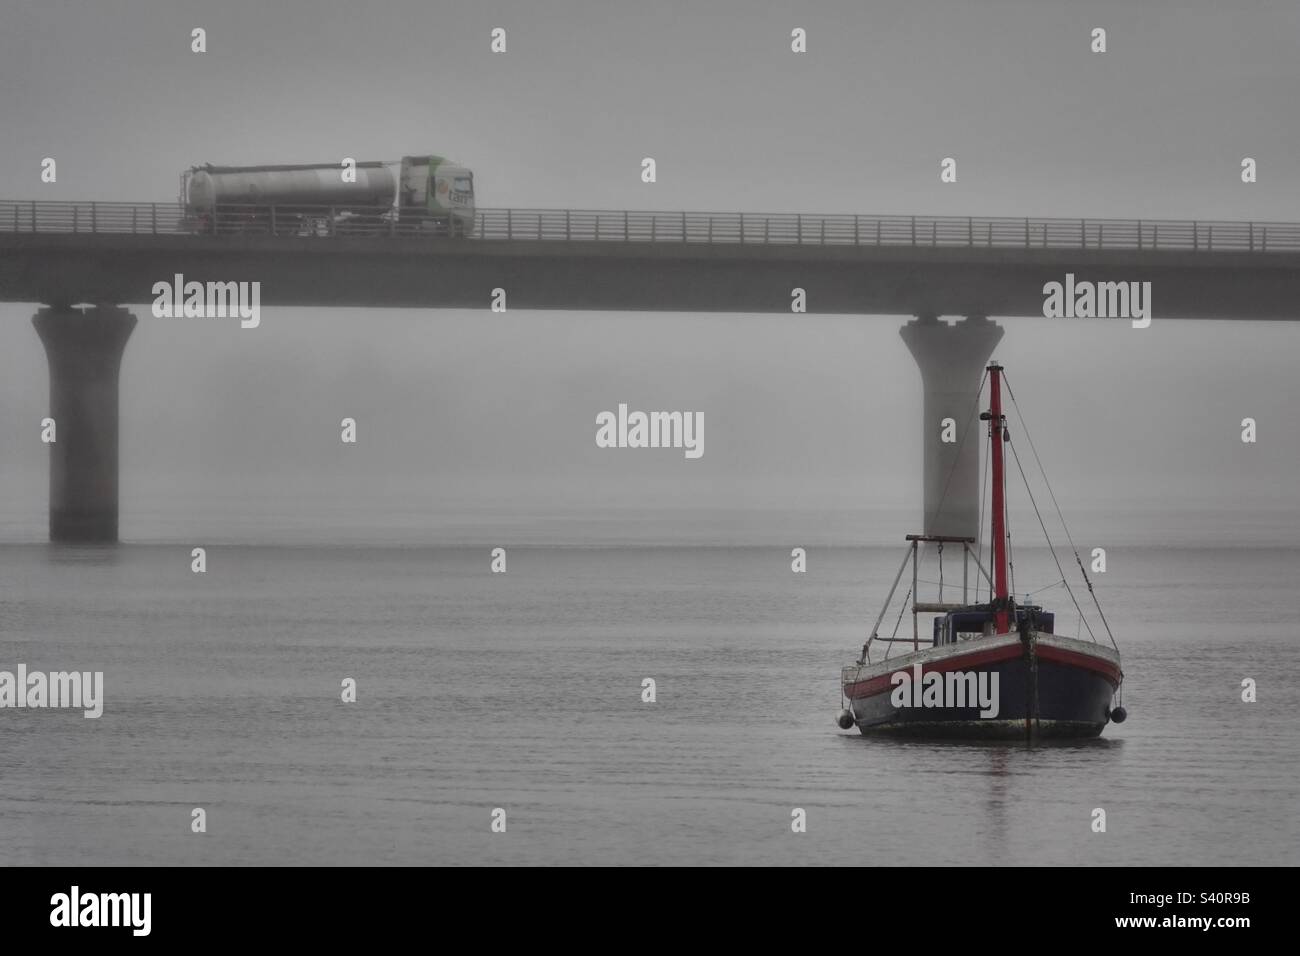 Foggy view of bridge and boat Stock Photo